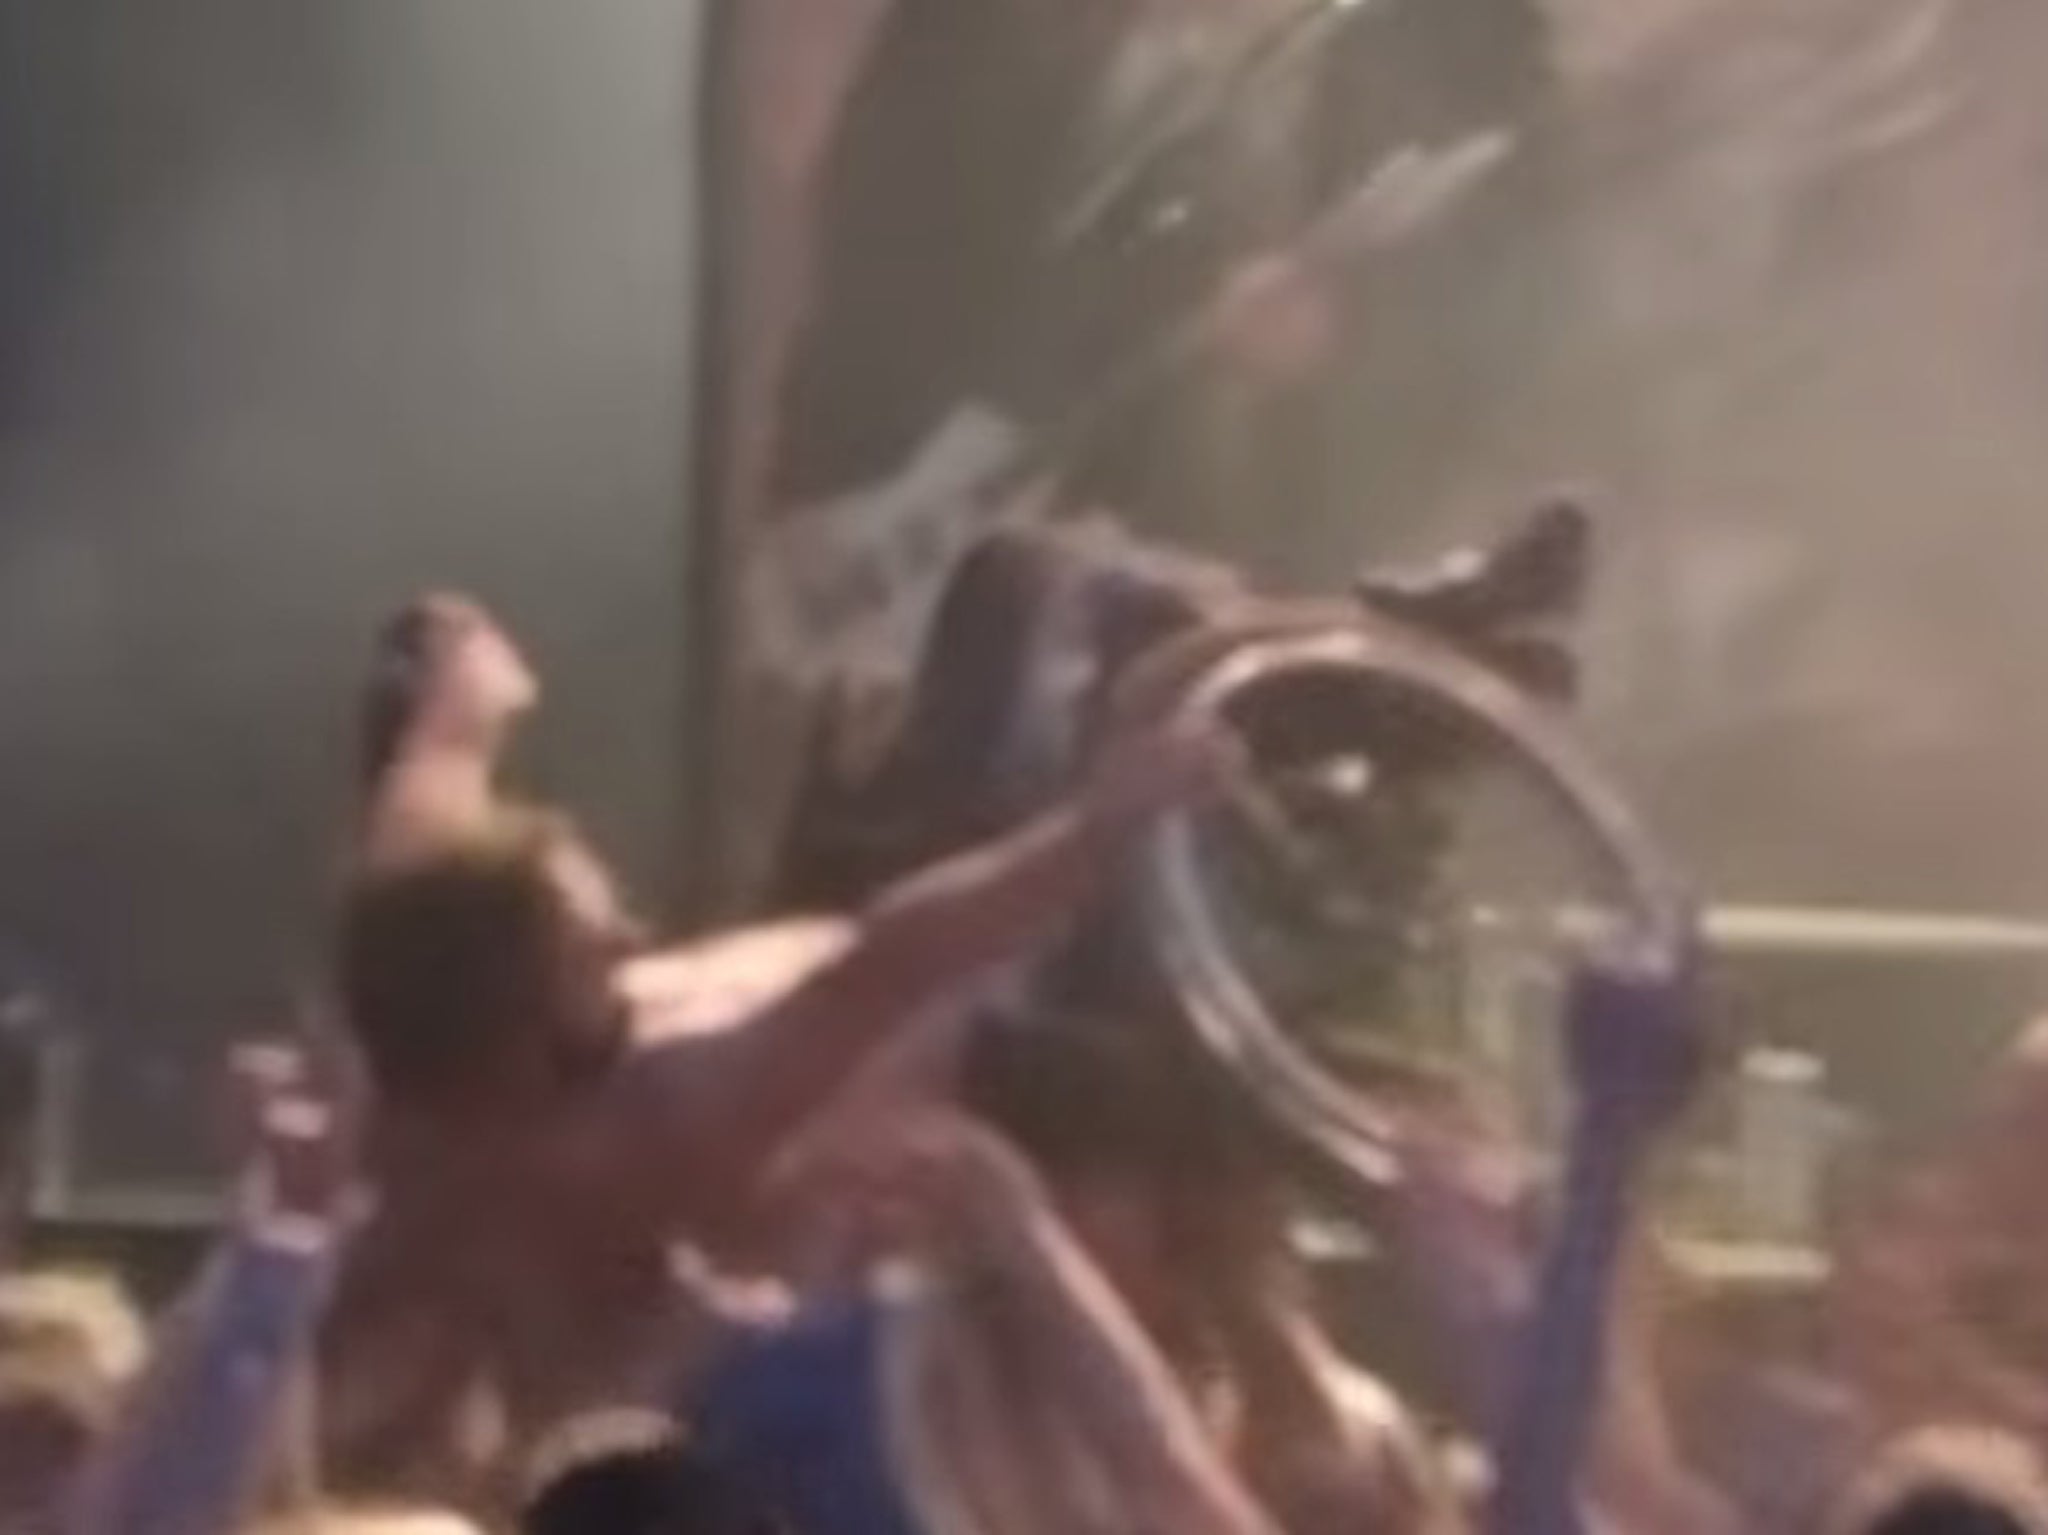 Fan-filmed footage of Arch Enemy’s set at the Dynamo Metalfest in Eindhoven shows a fan crowd surfing using a wheelchair.